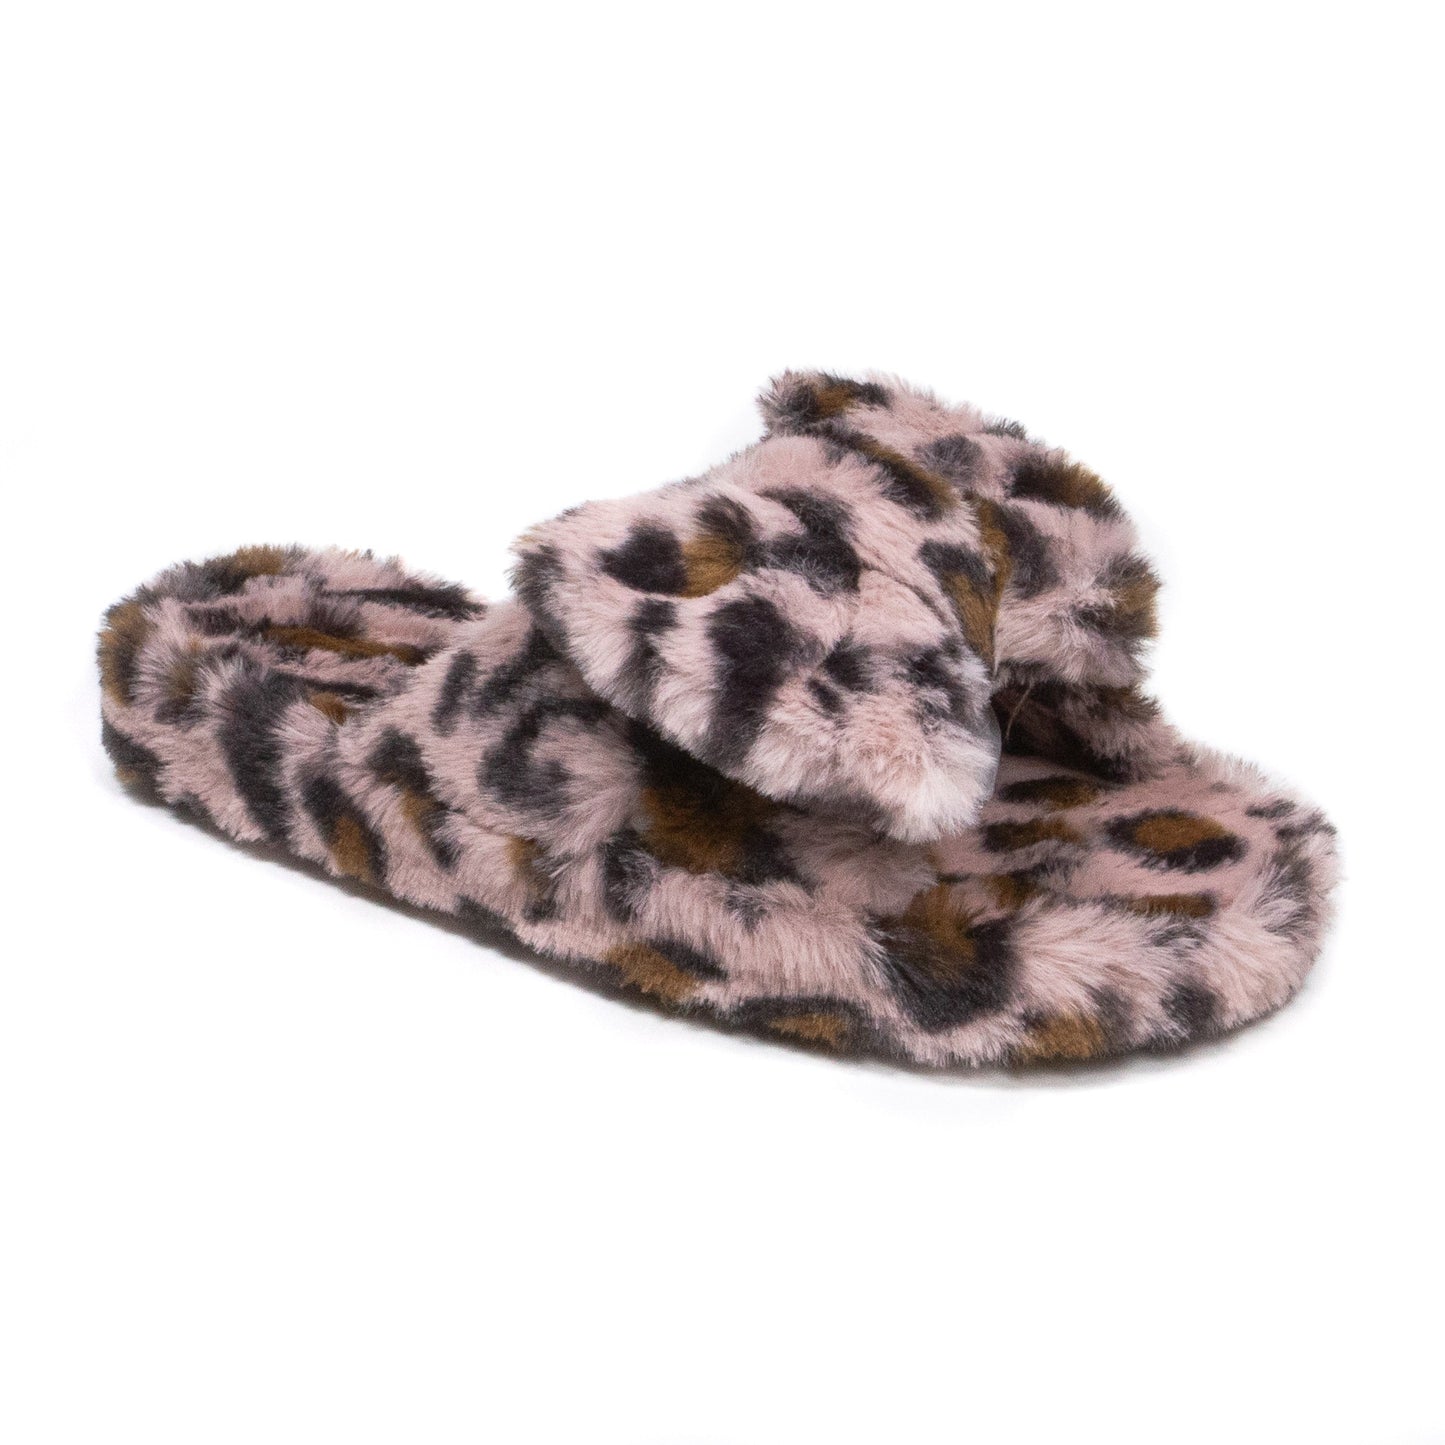 Cute & Cozy Bow-tied Fluffy Pink Leopard Slippers